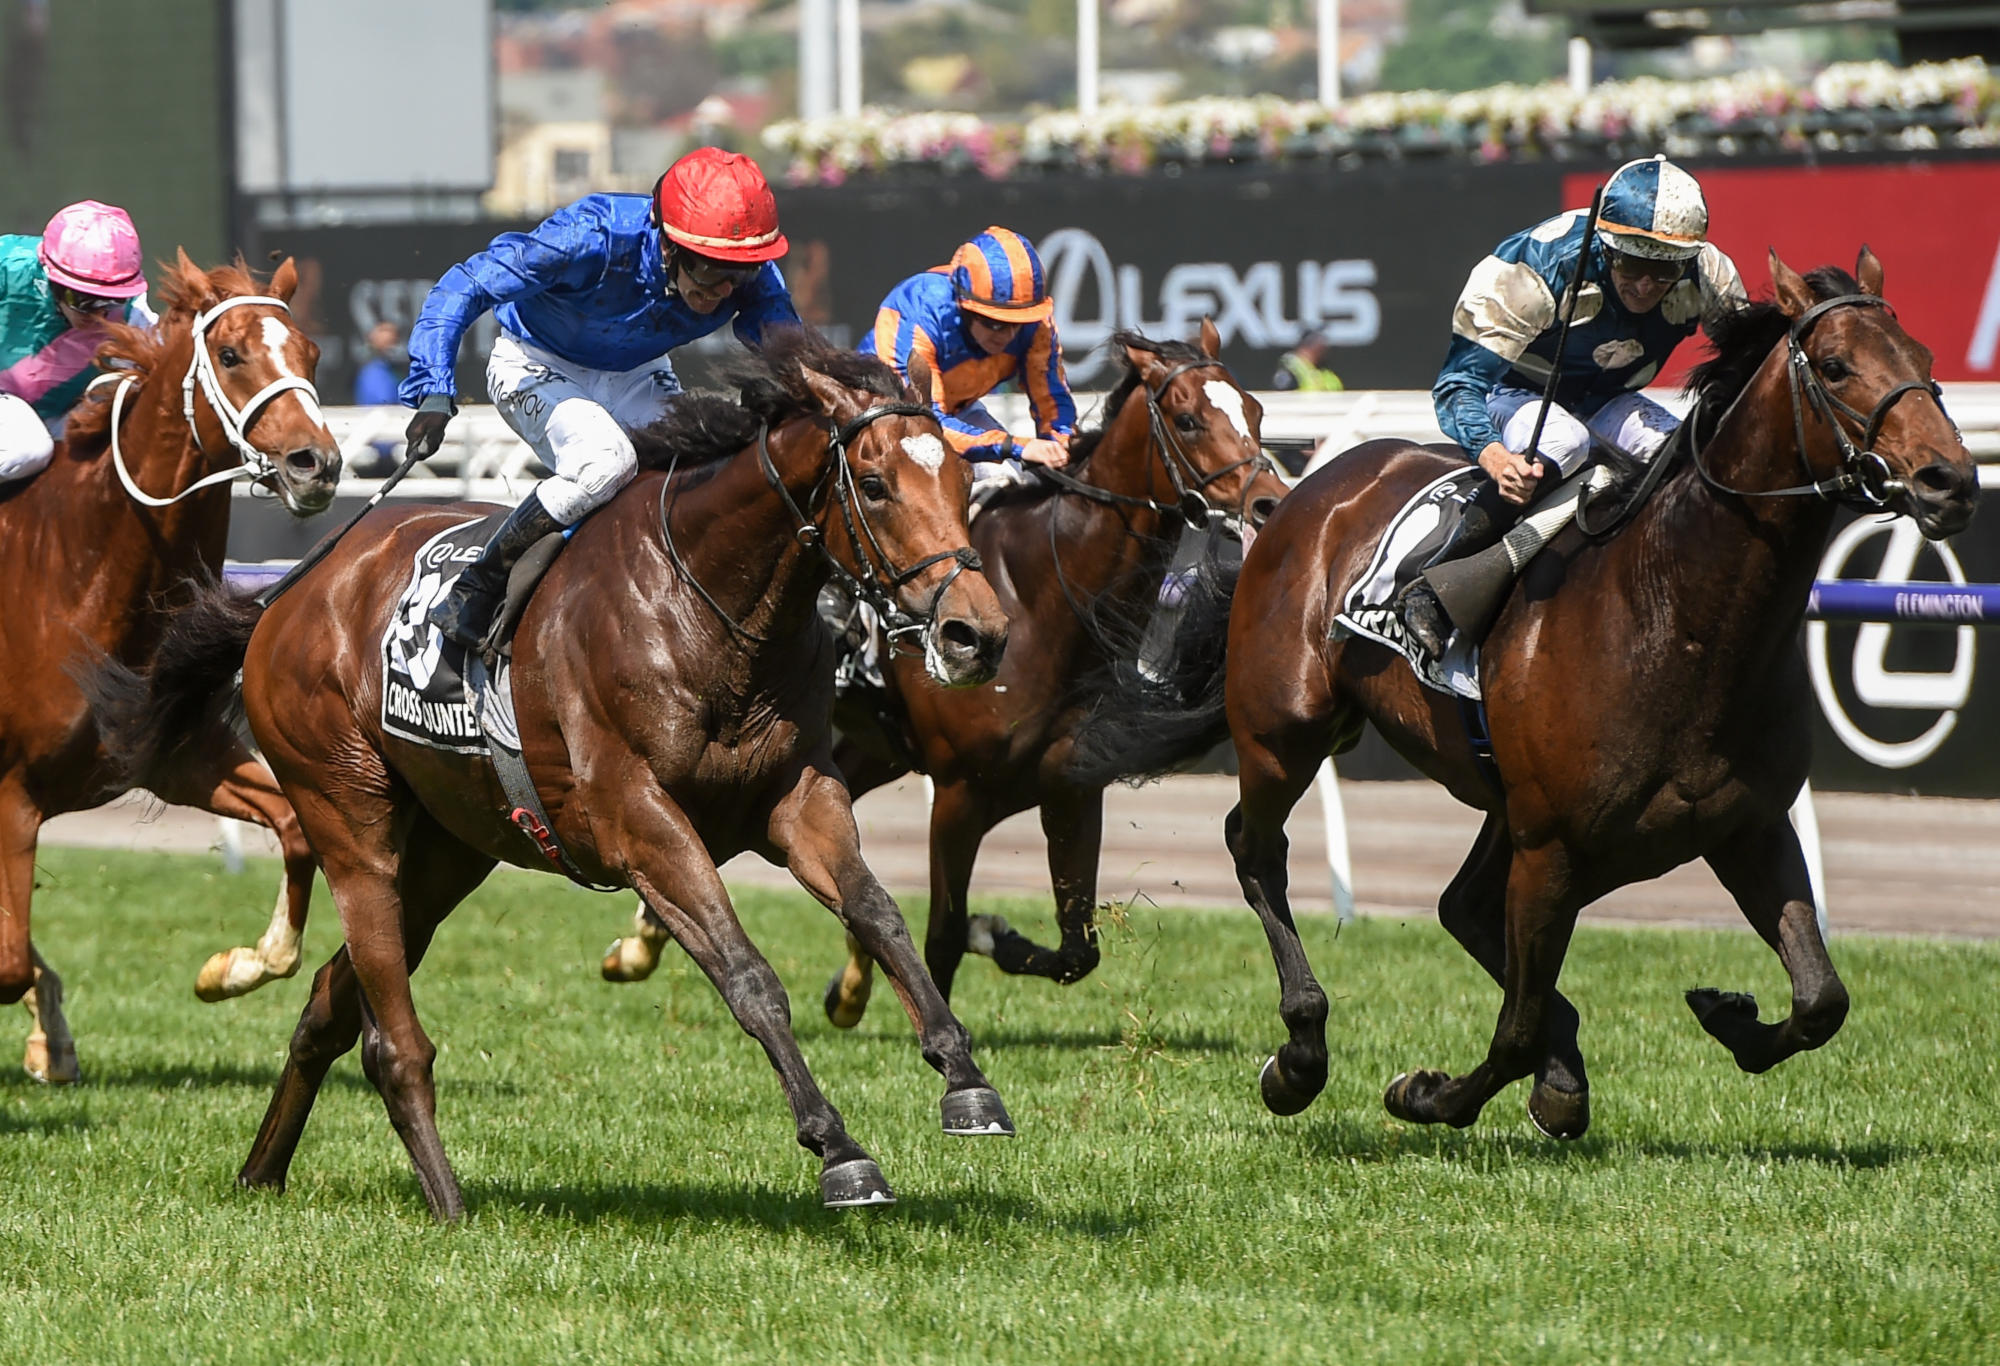 Cross Counter beats the field to win the 2018 Melbourne Cup.